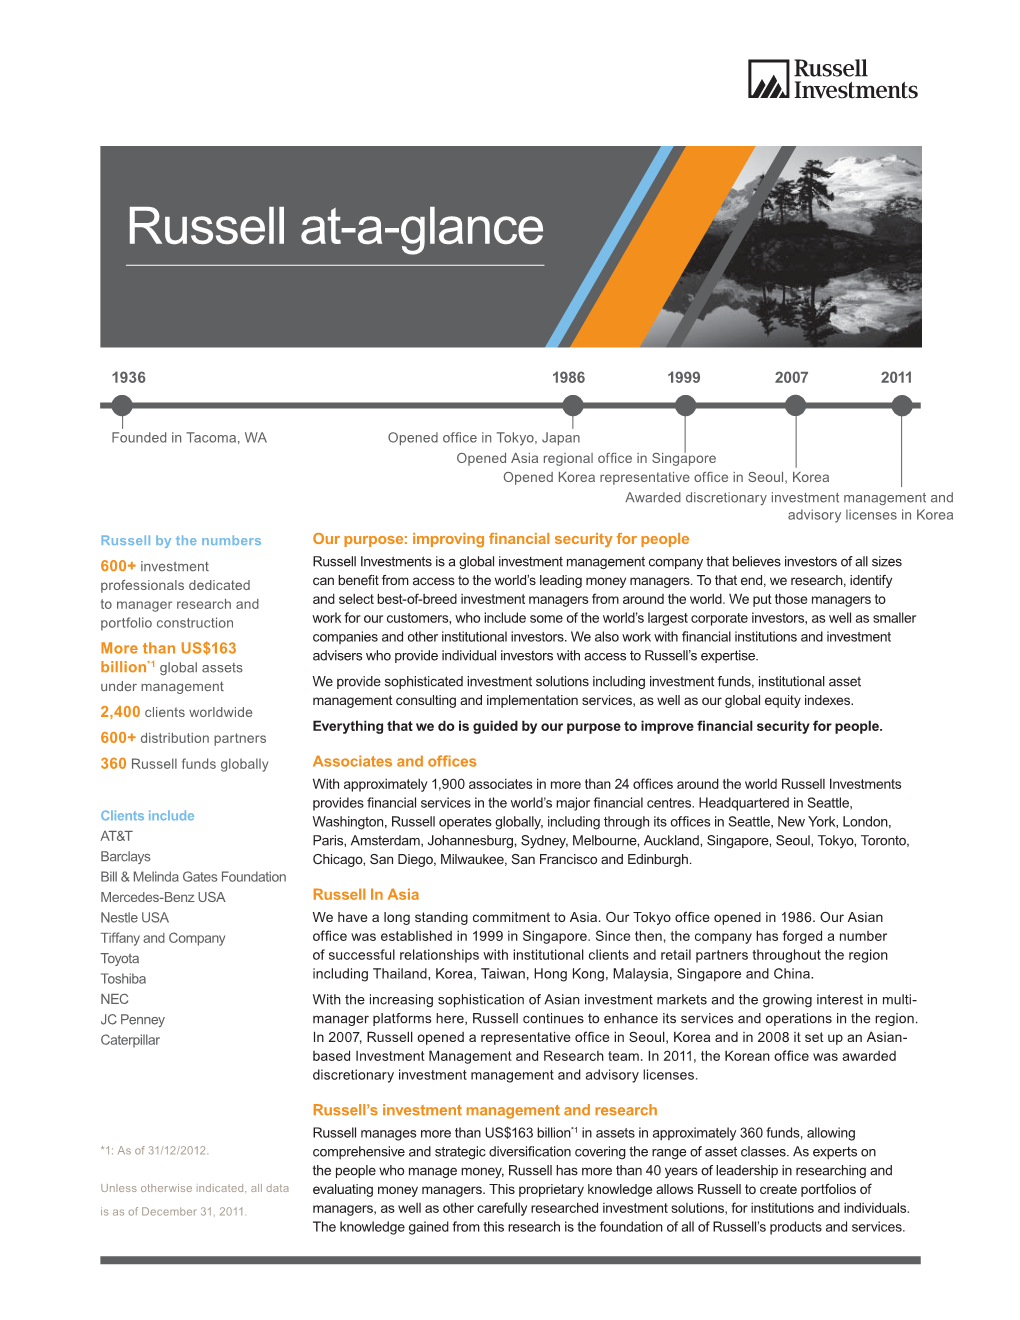 Russell At-A-Glance